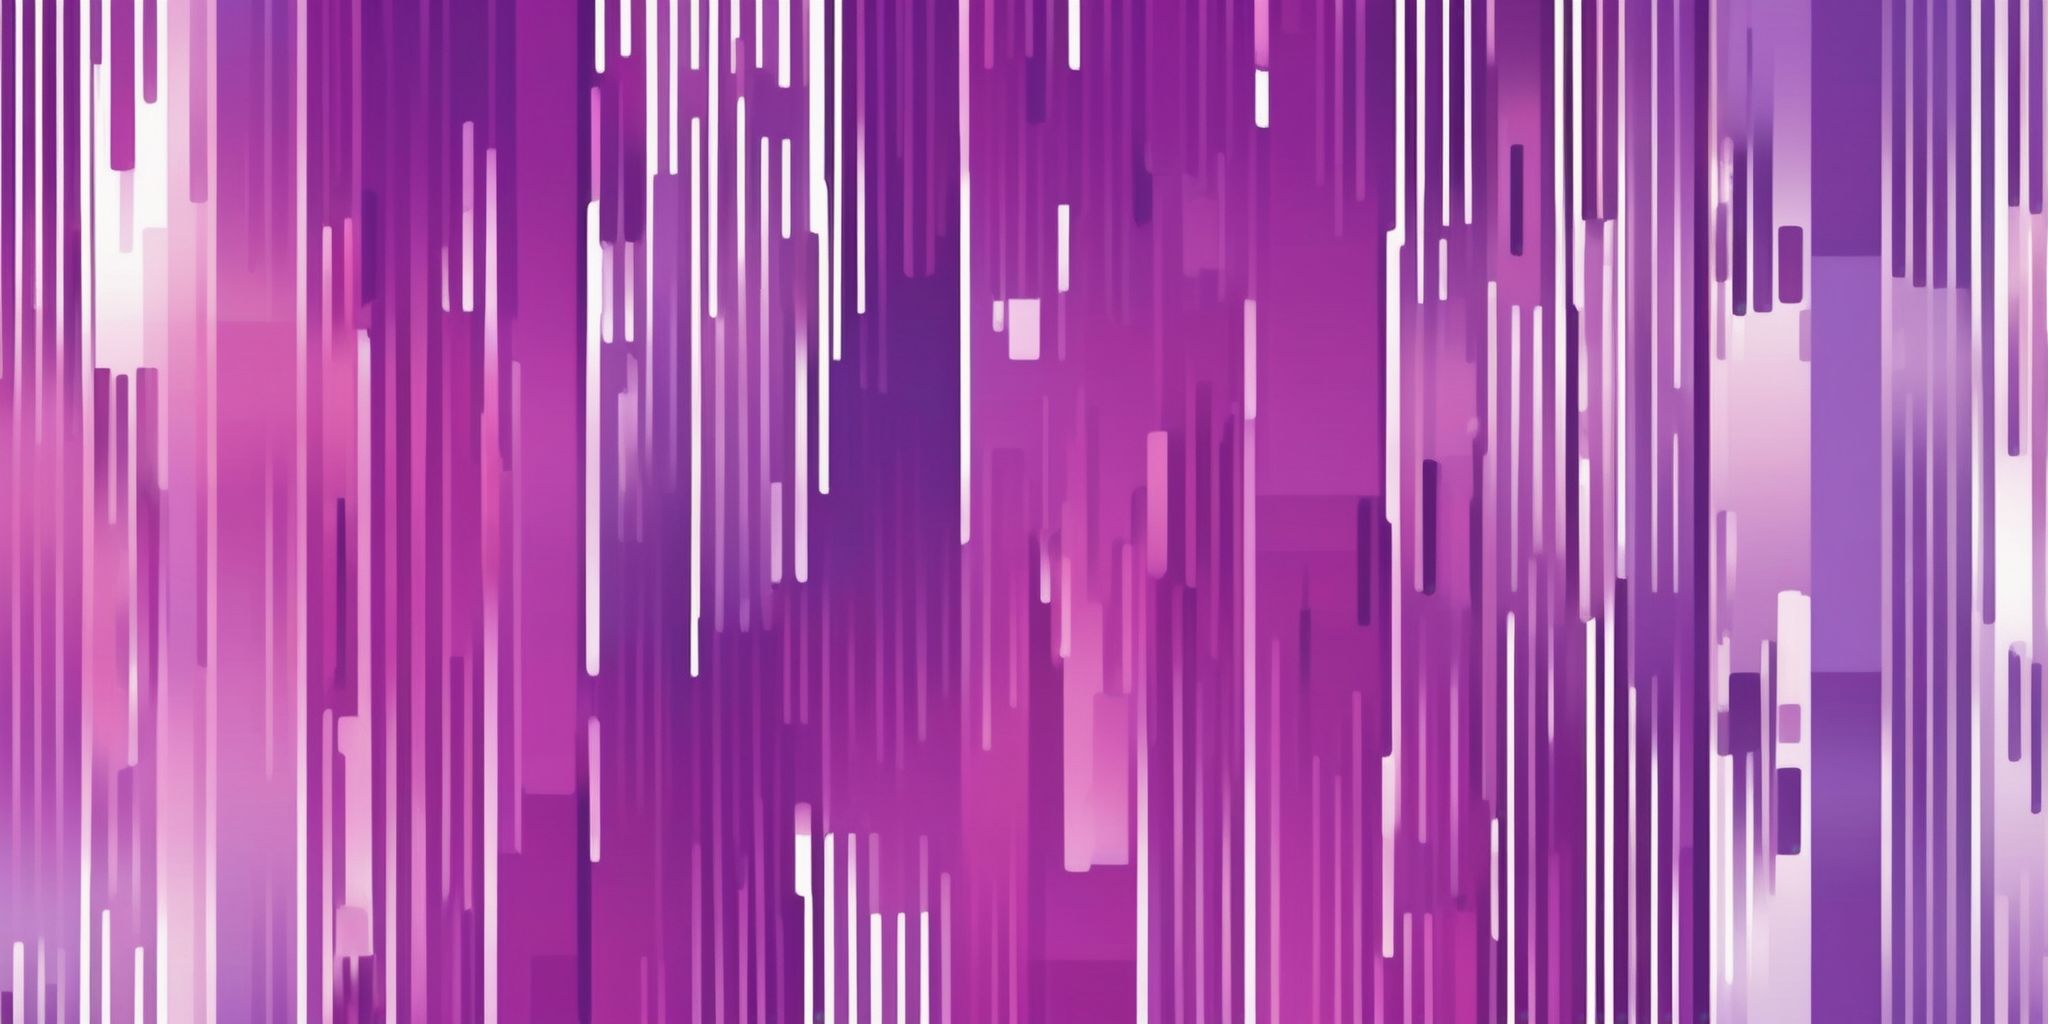 Barcode in flat illustration style, colorful purple gradient colors